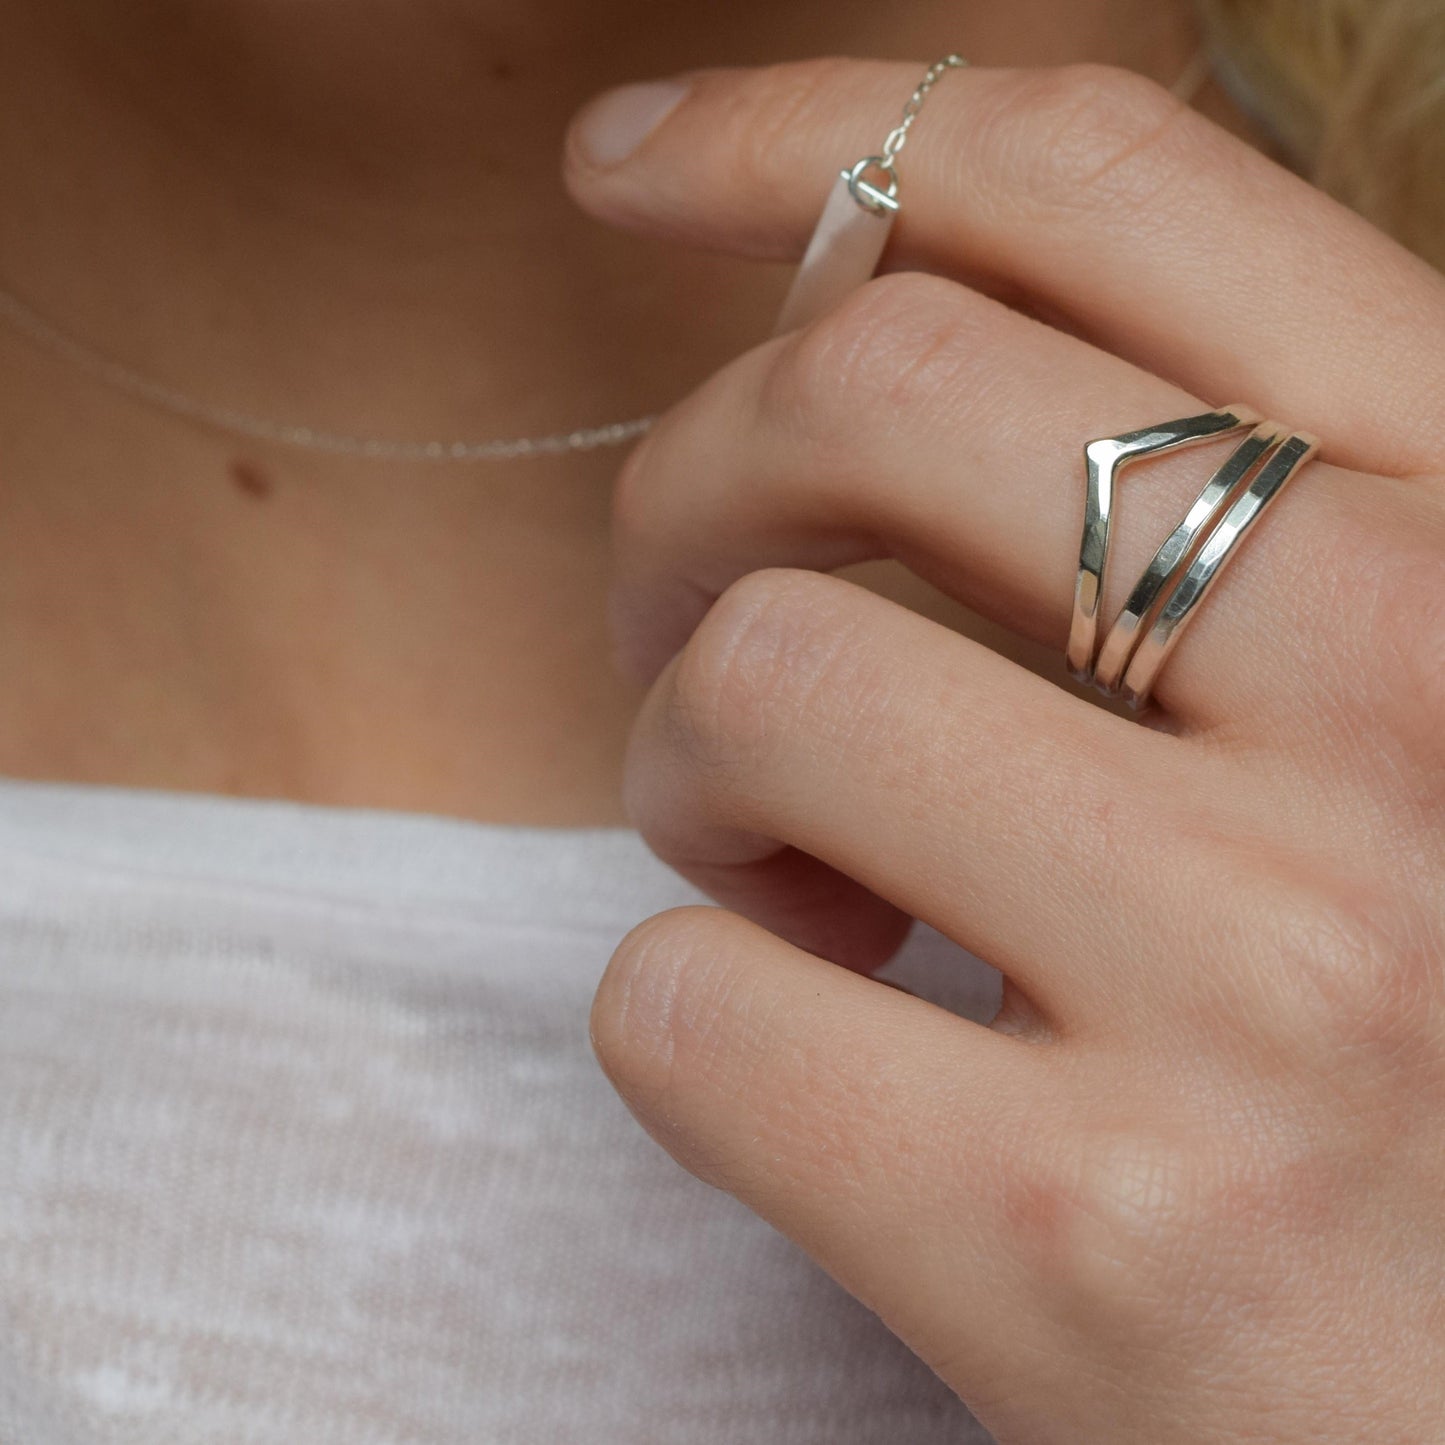 Chevron stacking rings worn together on middle finger